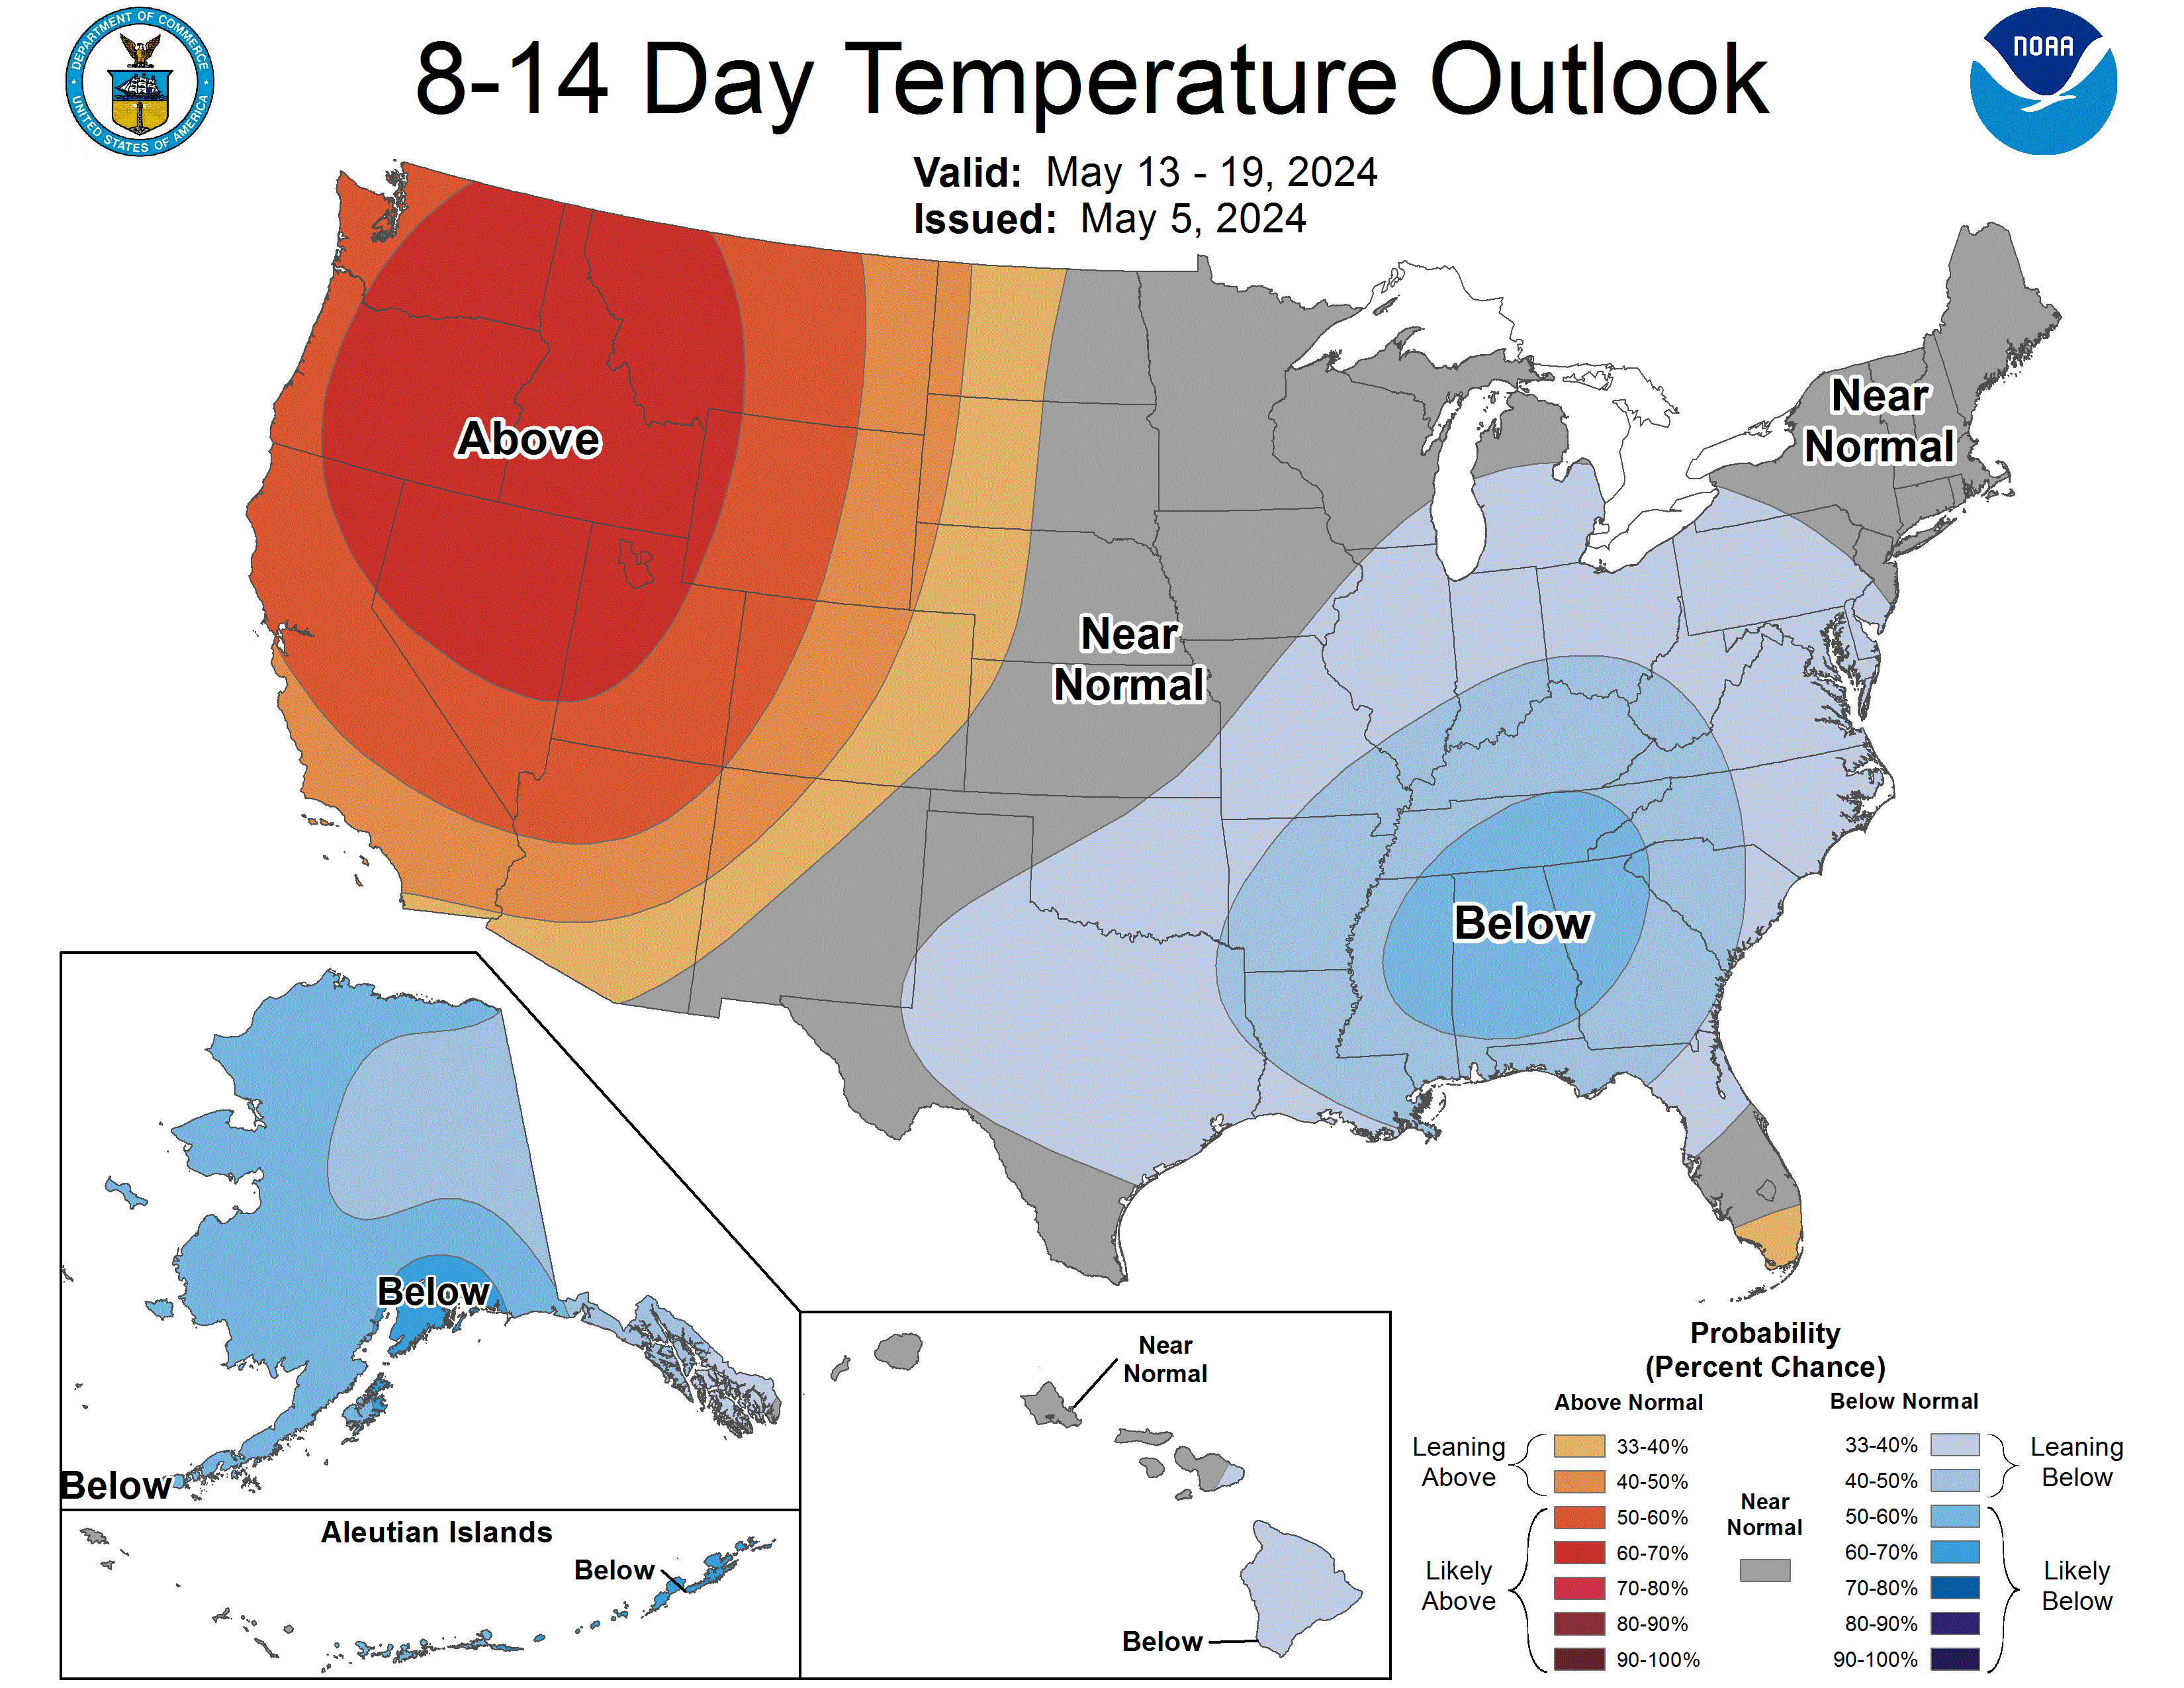 8 to 14 Day Temperature Outlook